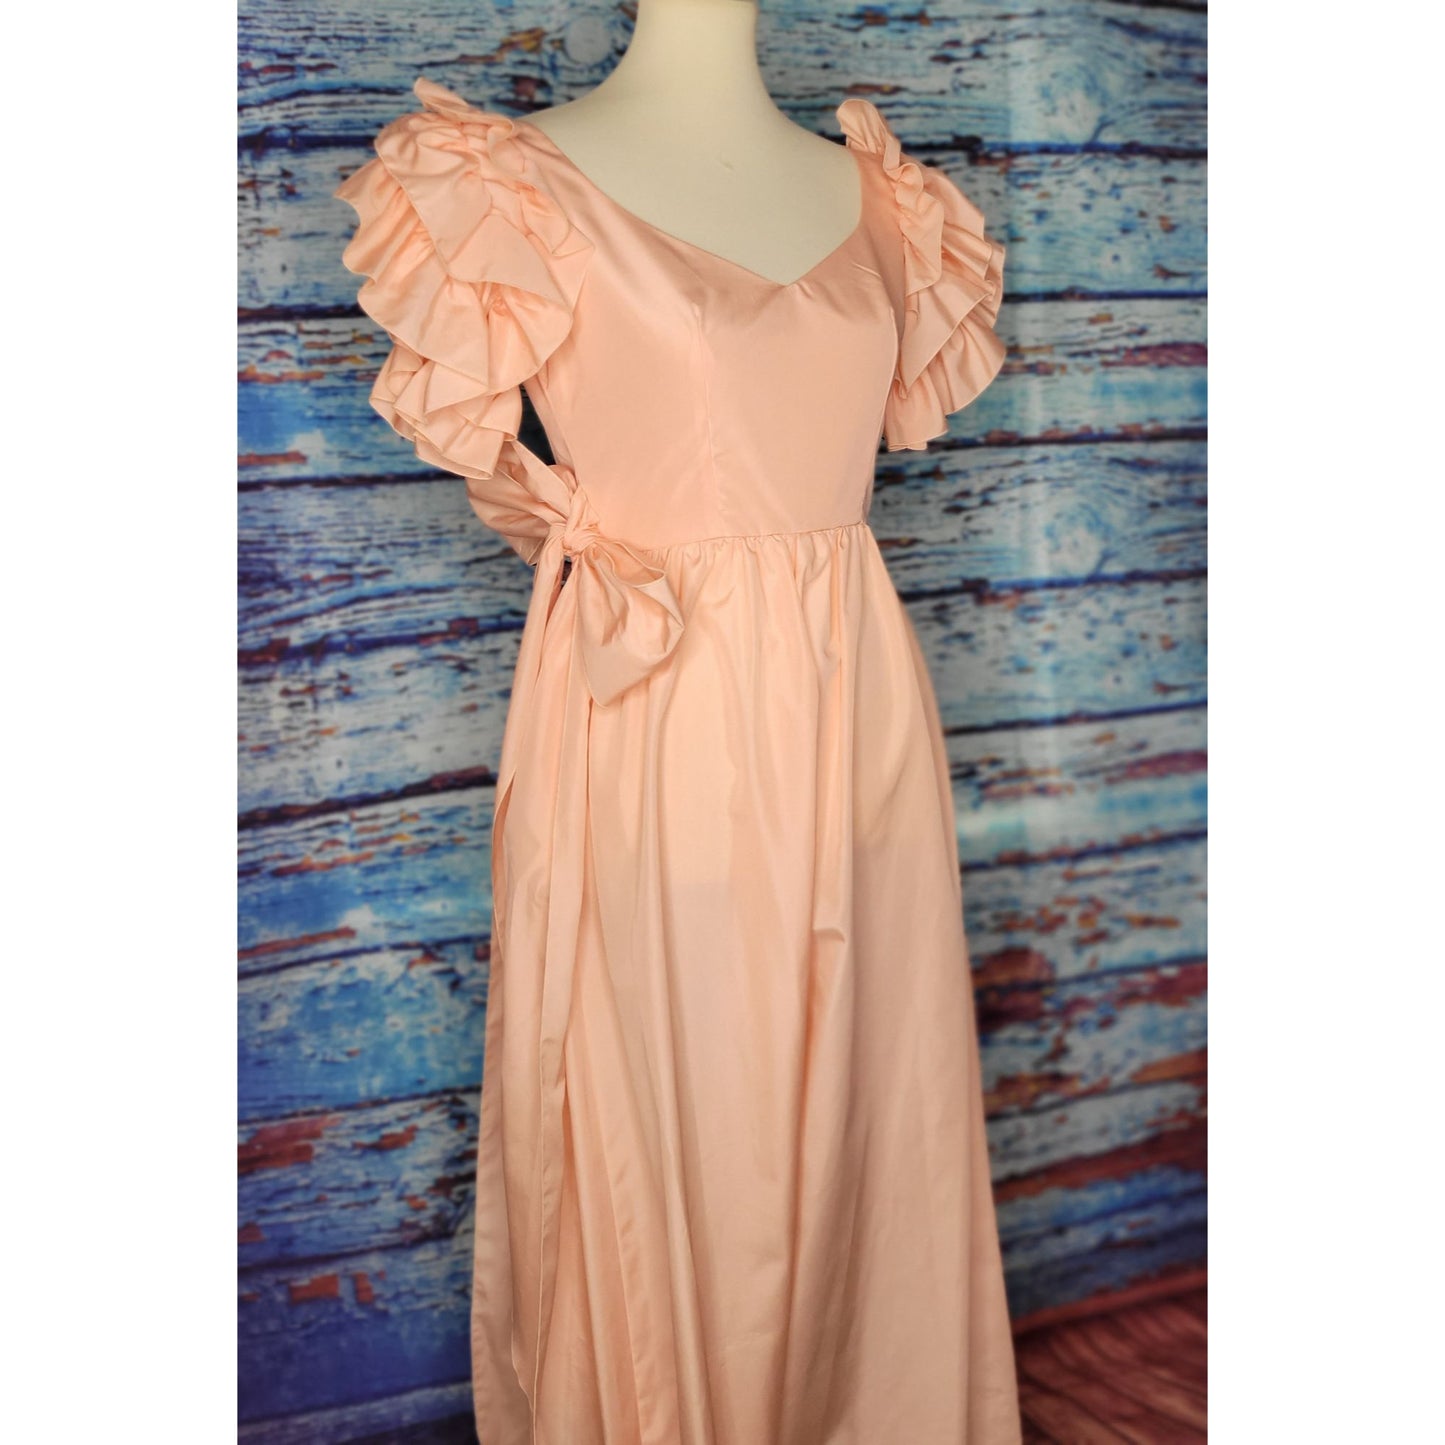 Vintage 80's House of Bianchi Peach/Pink Prom/Bridesmaid dress